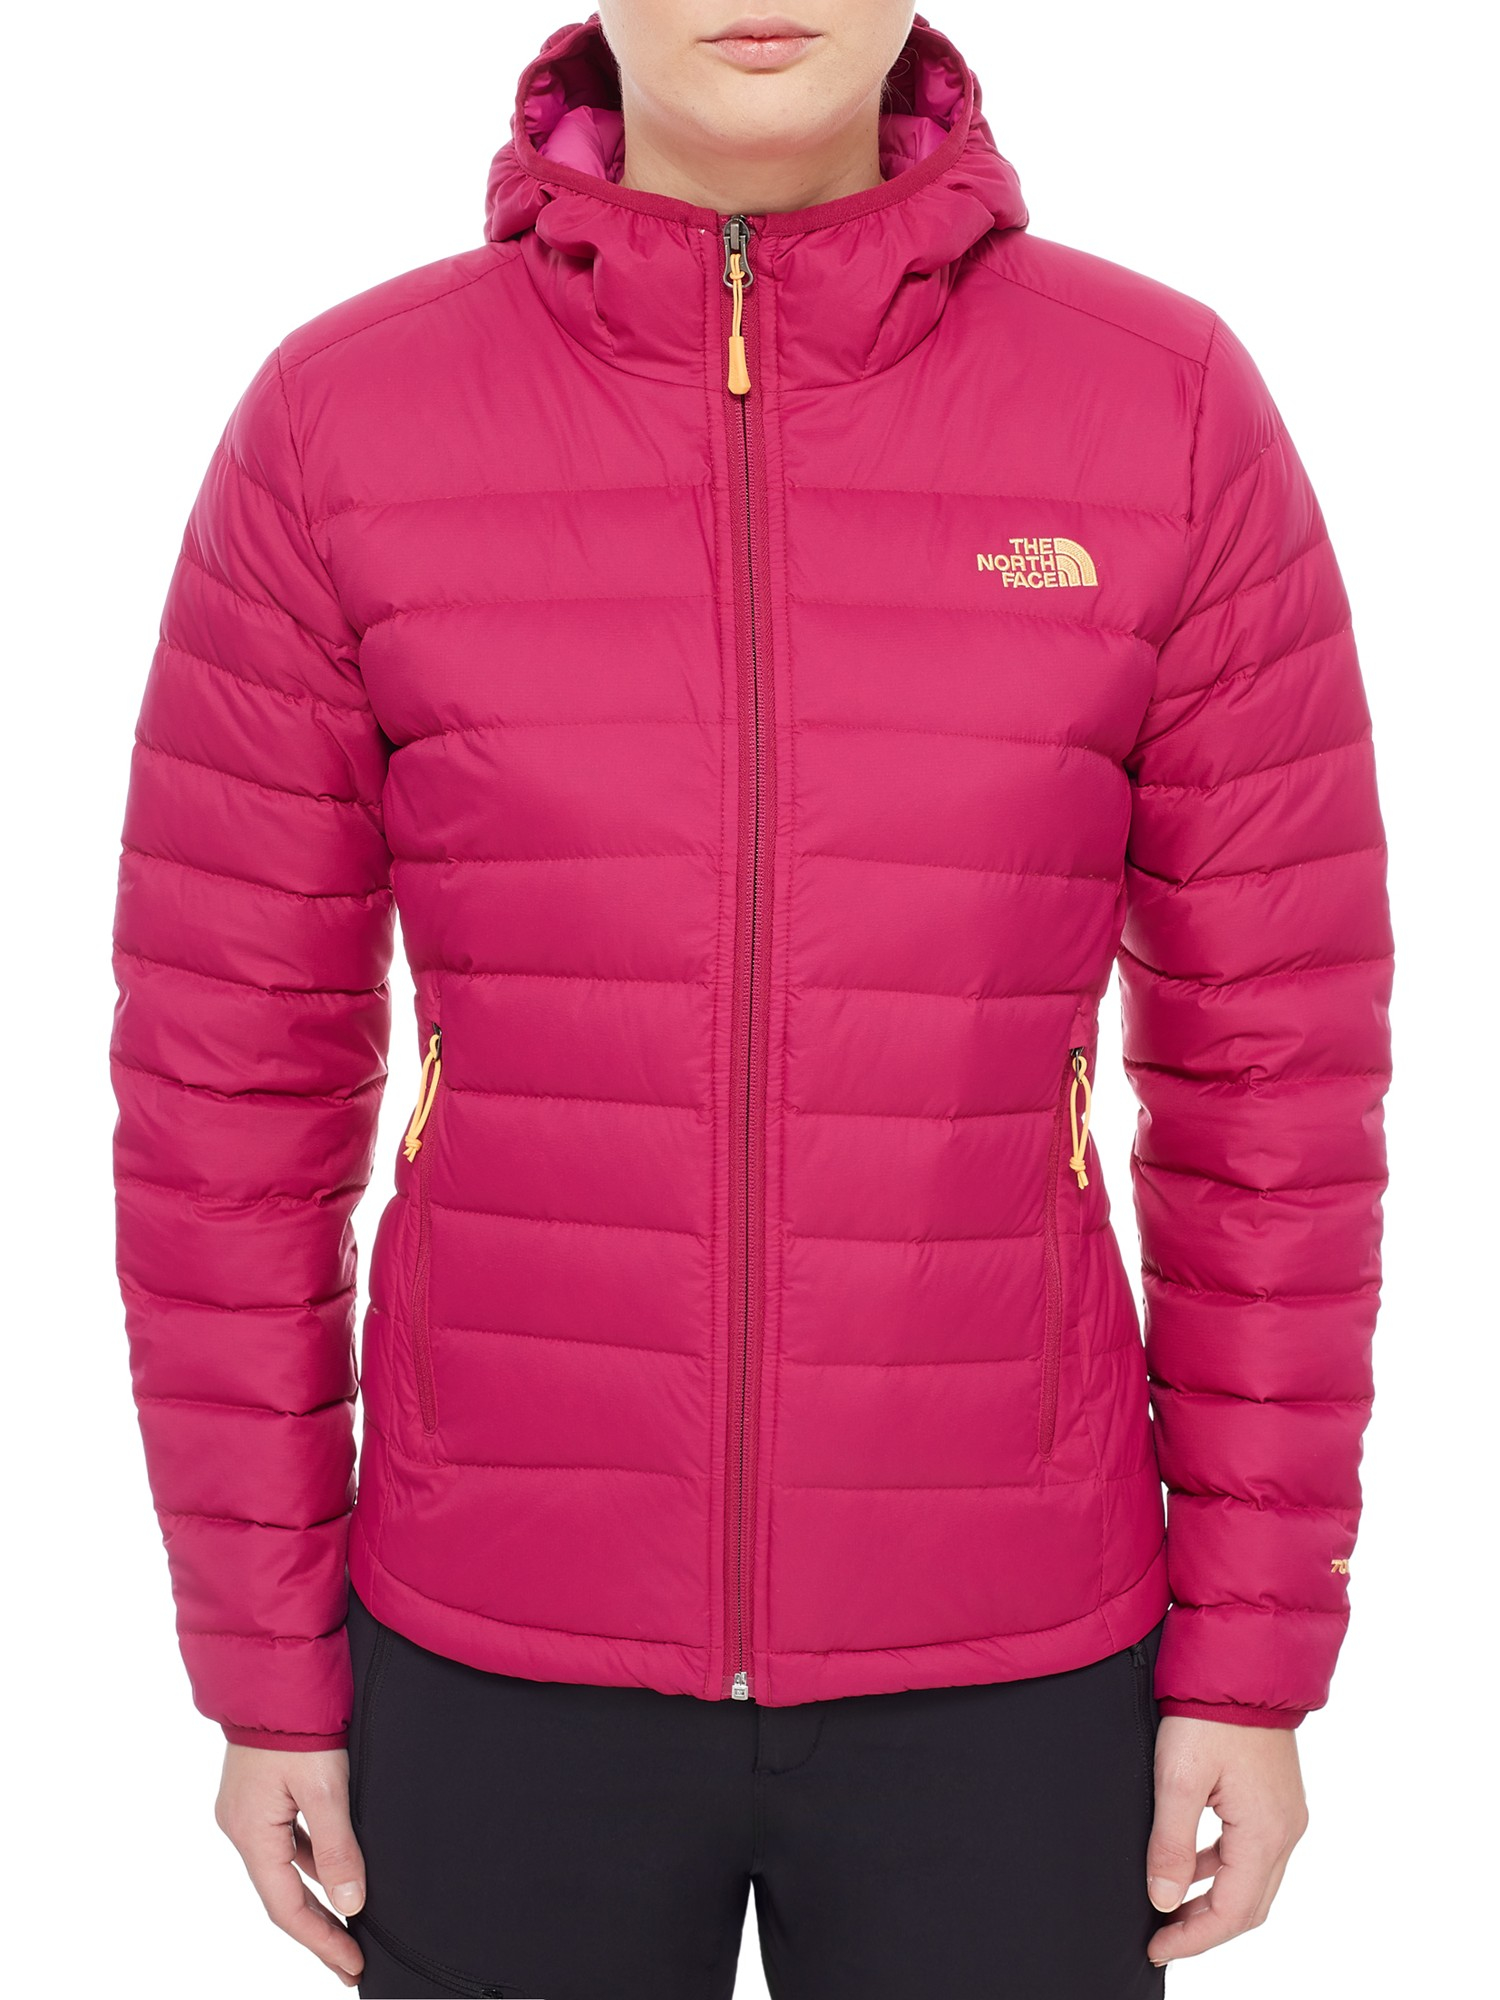 women's celeste hooded jacket the north face